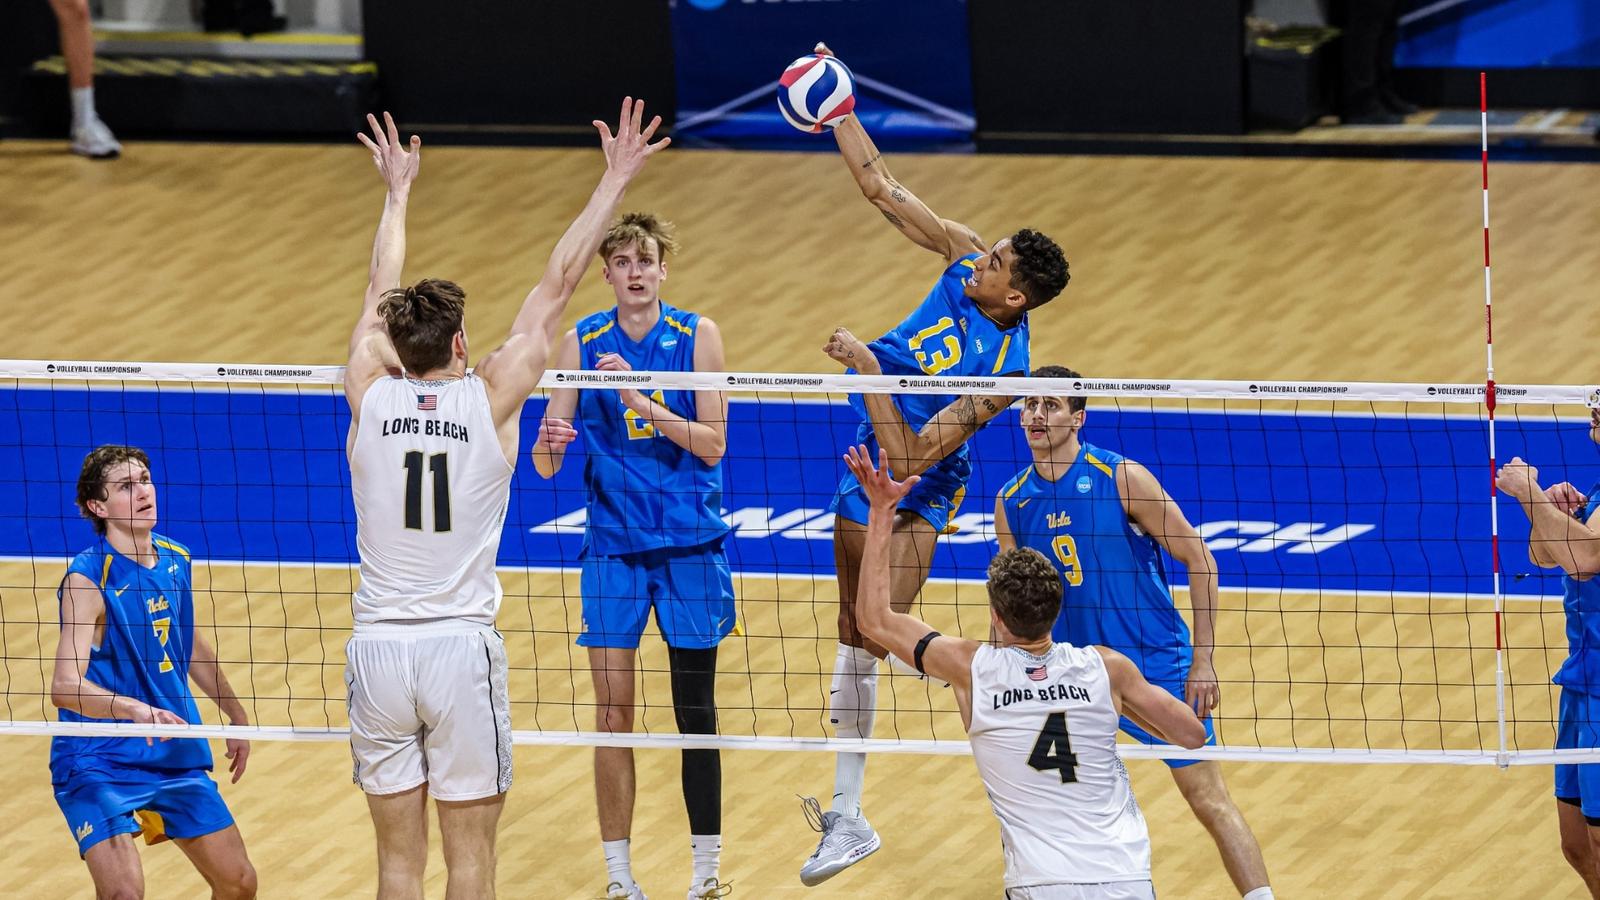 Merrick McHenry Leads UCLA to 21st Men’s Volleyball Title, Named Student-Athlete of the Week